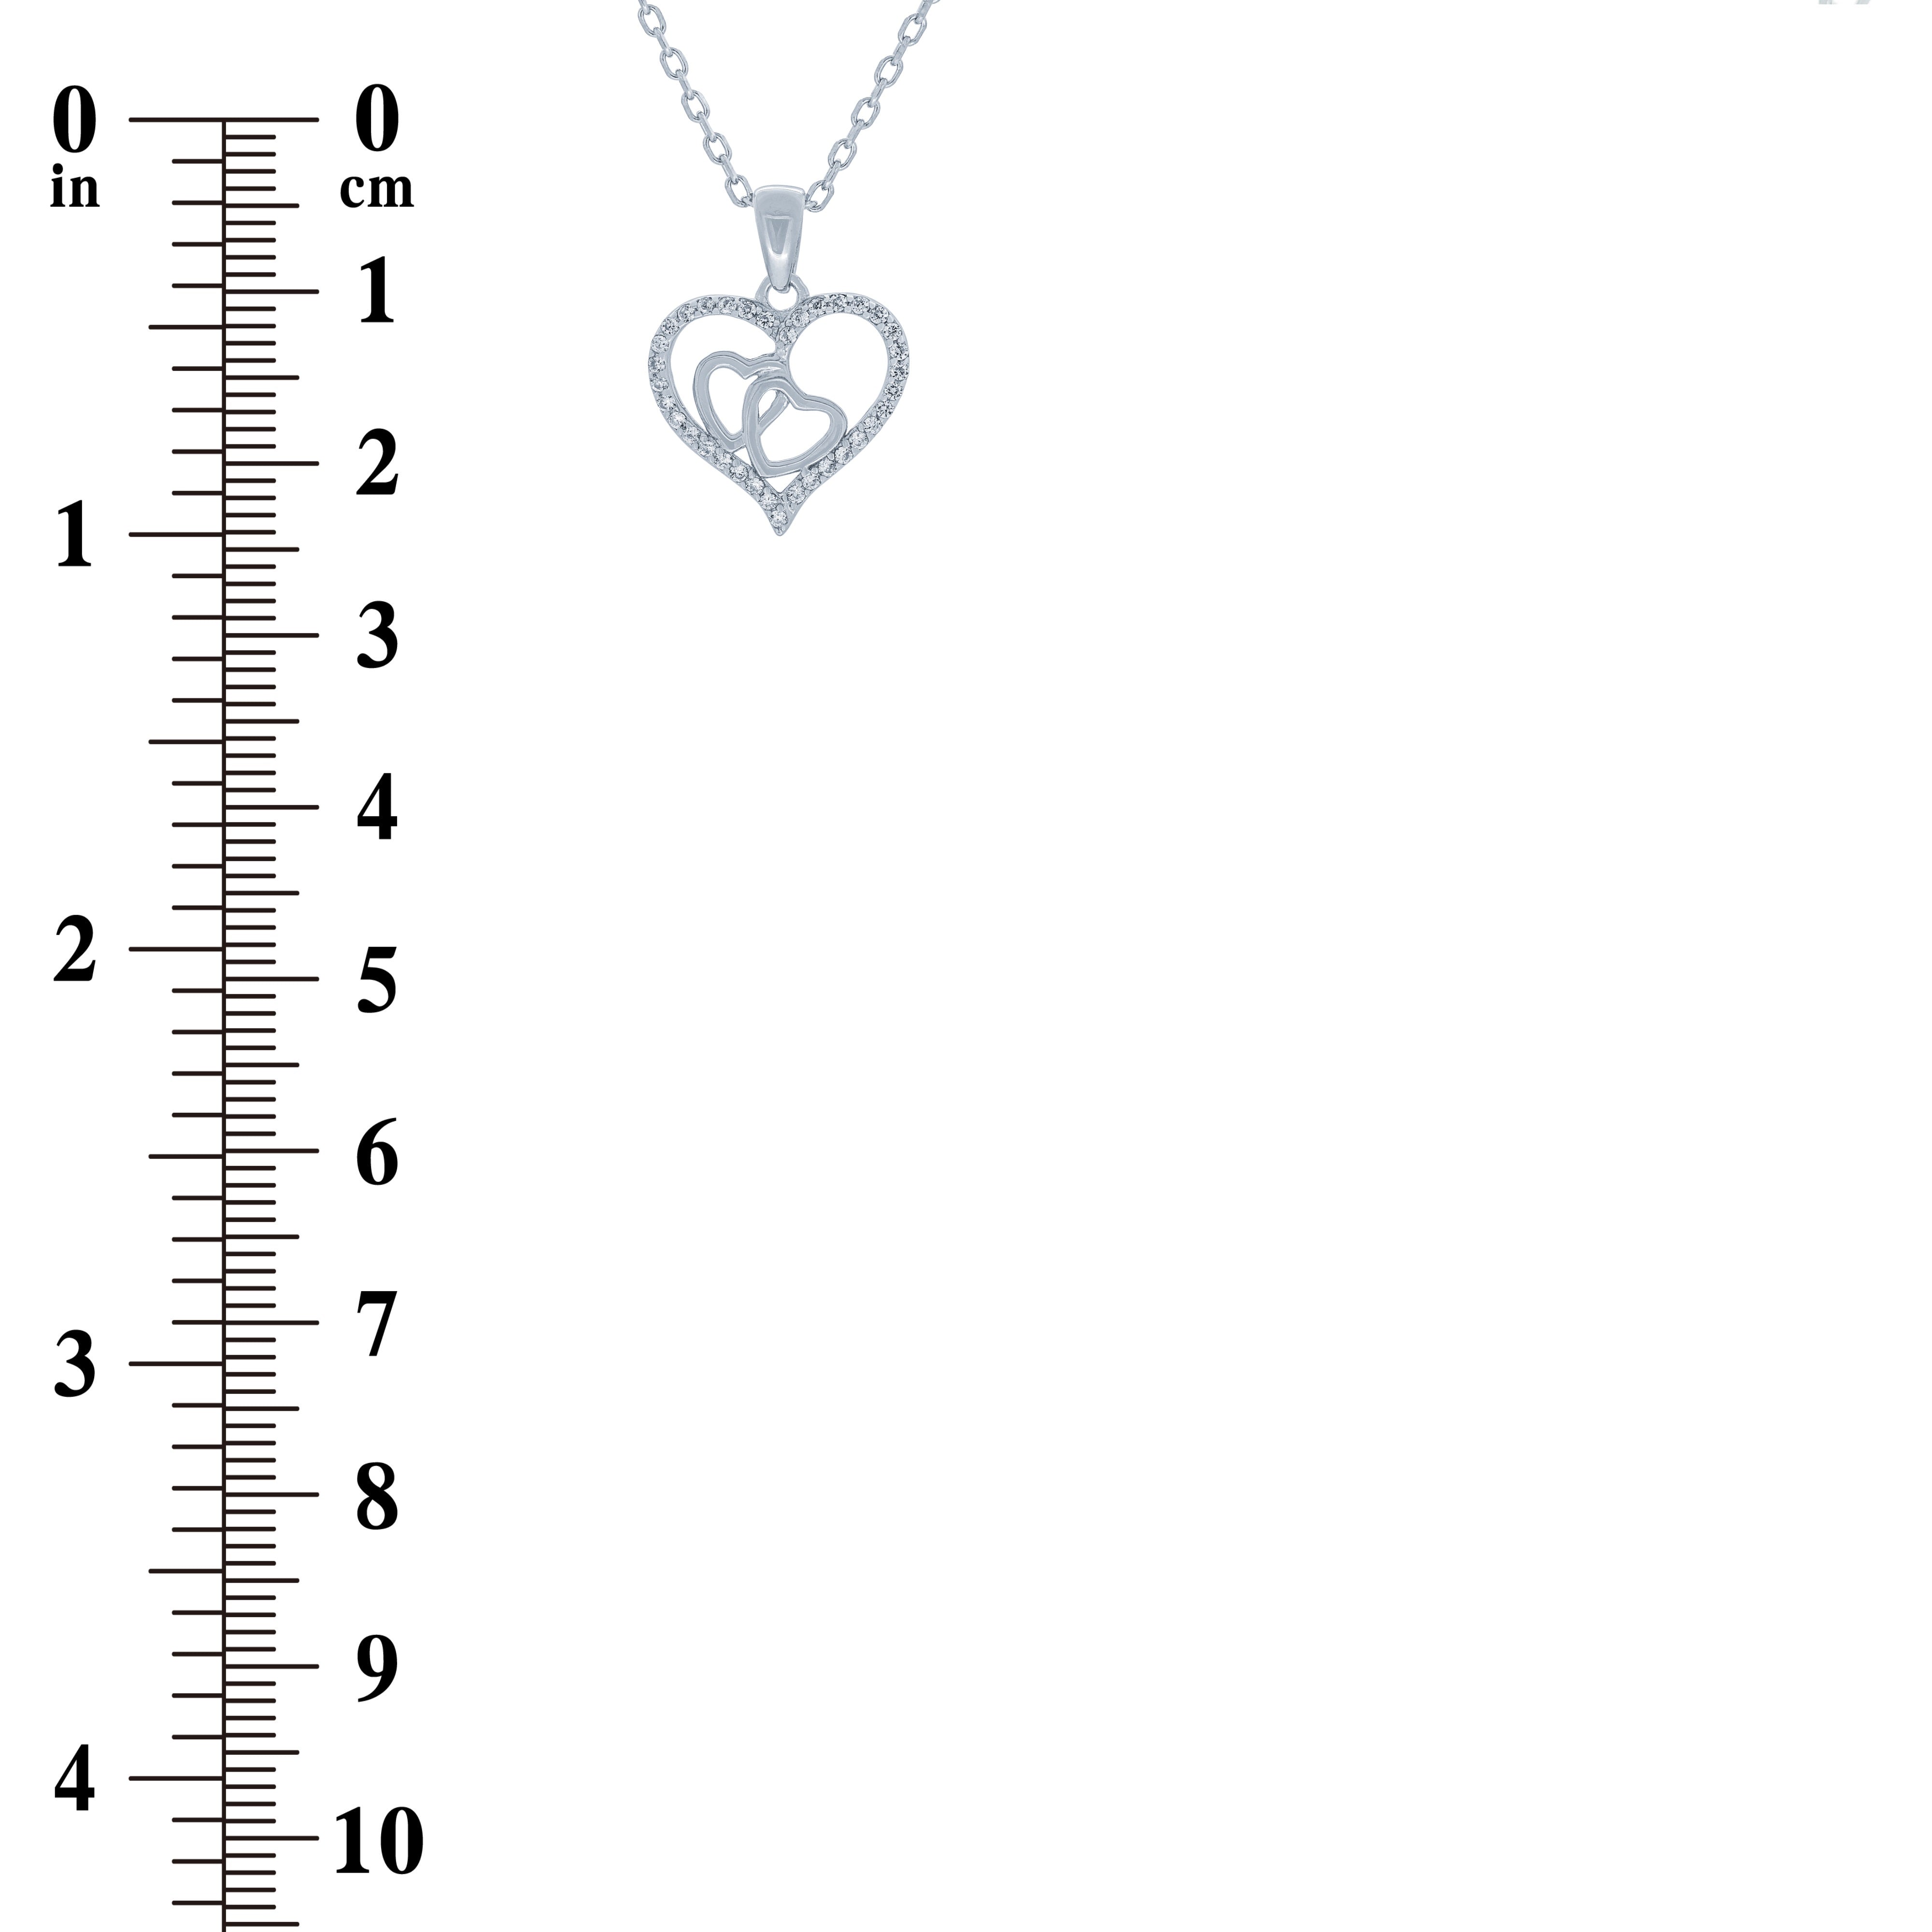 (100144) White Cubic Zirconia Heart Pendant Necklace In Sterling Silver